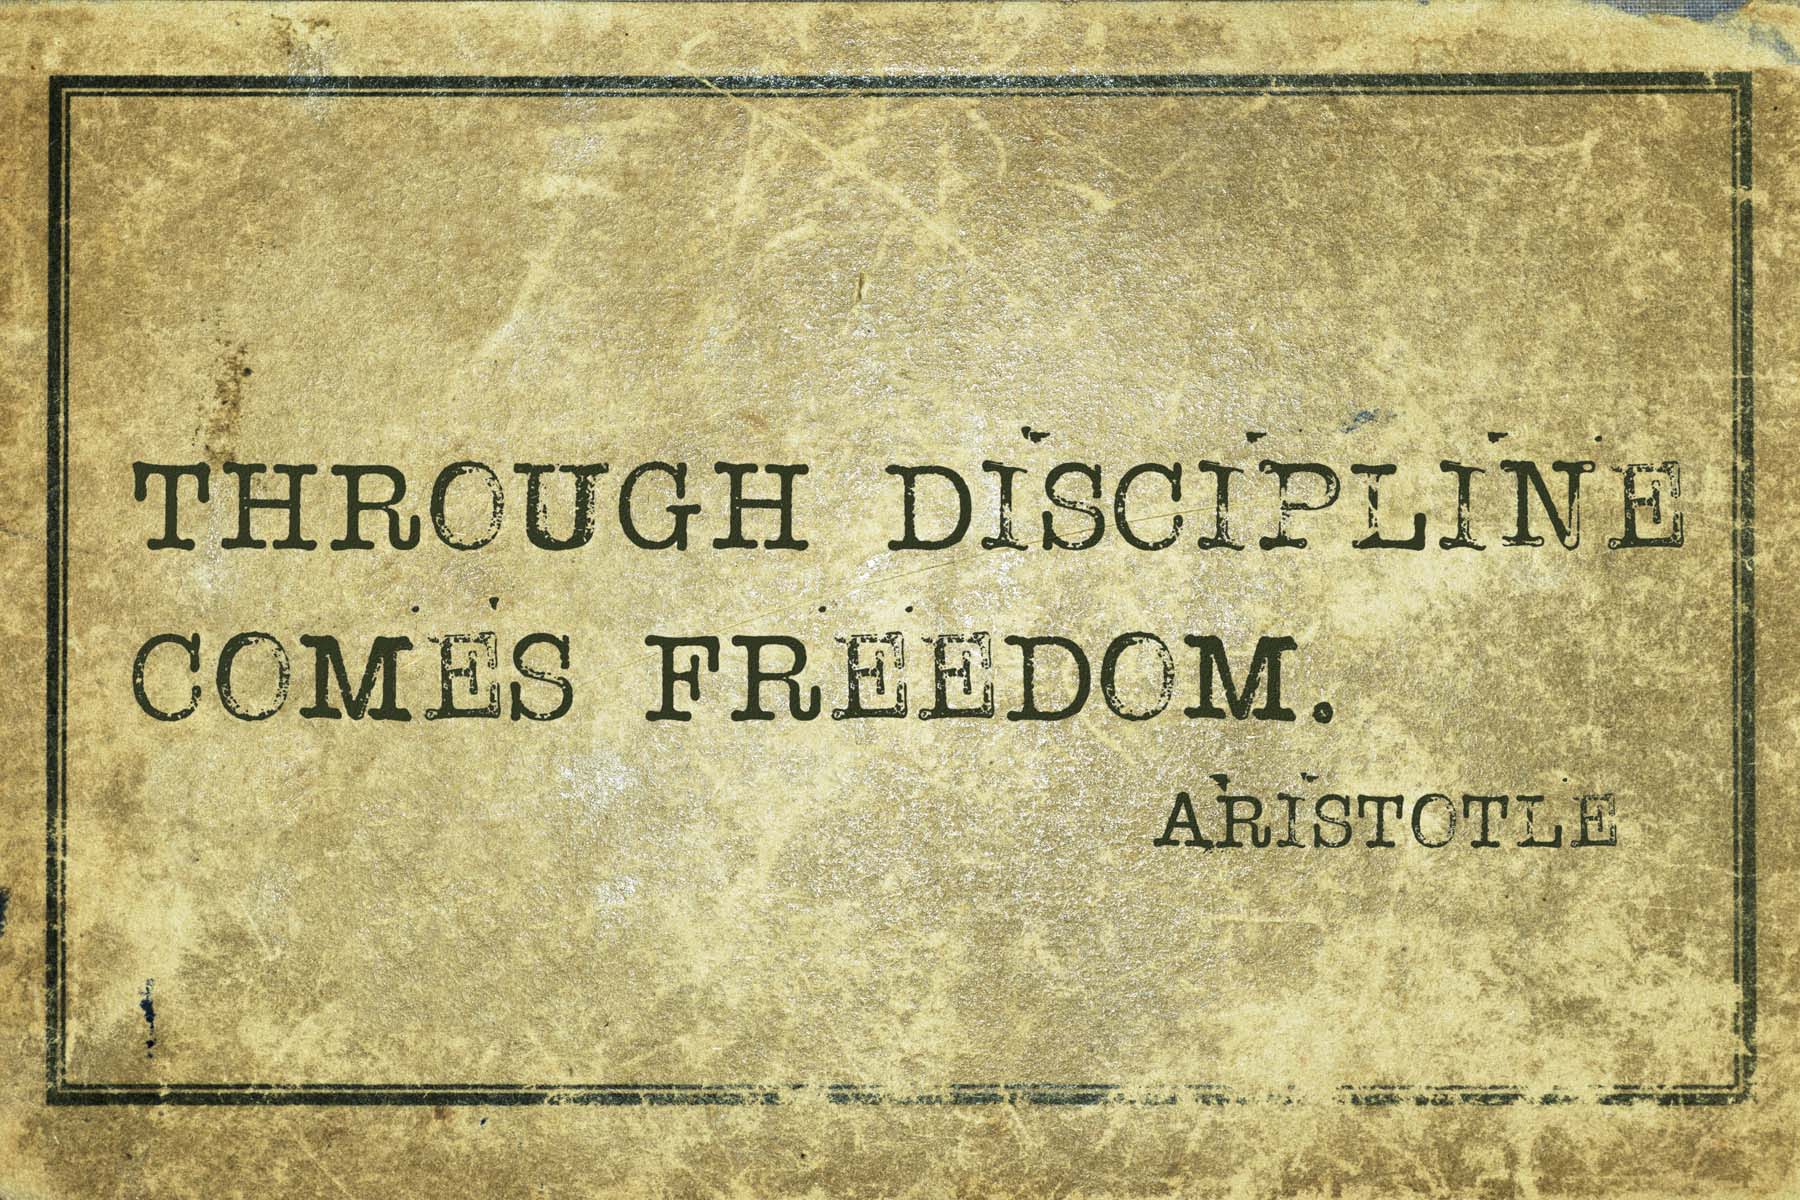 Small Daily Actions Create Success - Through Discipline Comes Freedom - Ancient Greek Philosopher Aristotle Quote Printed On Grunge Vintage Cardboard